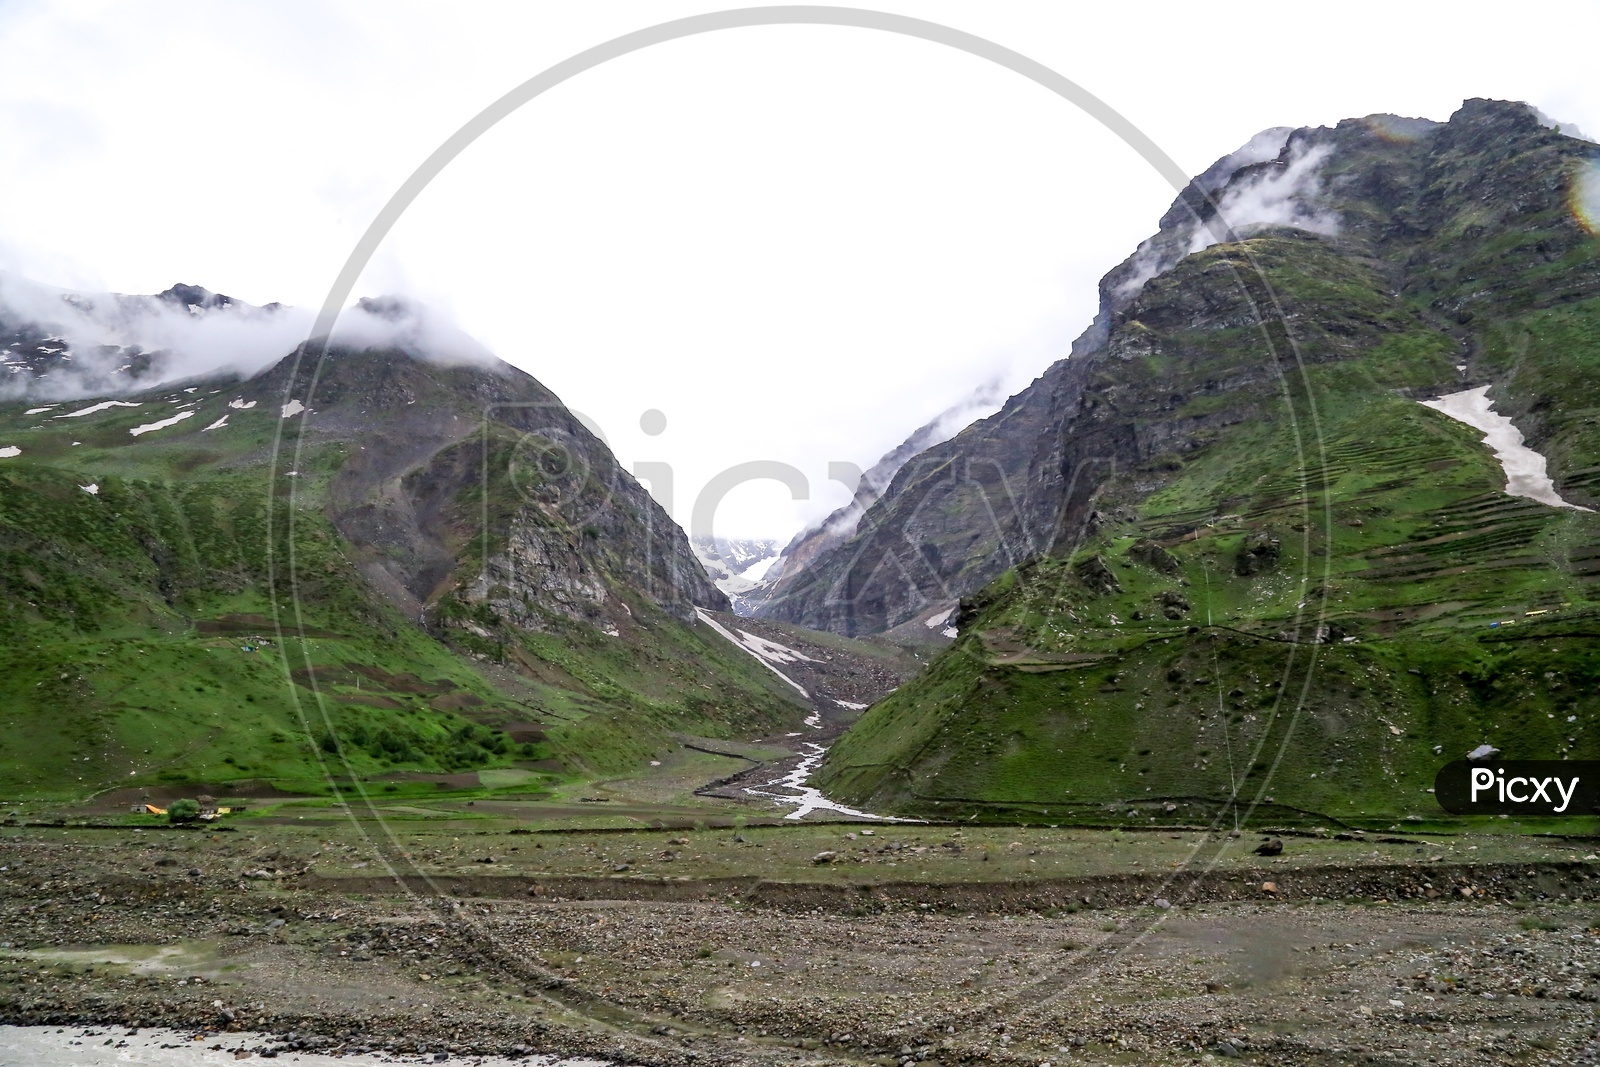 Chenab River Flow On the way to Rohtang Pass